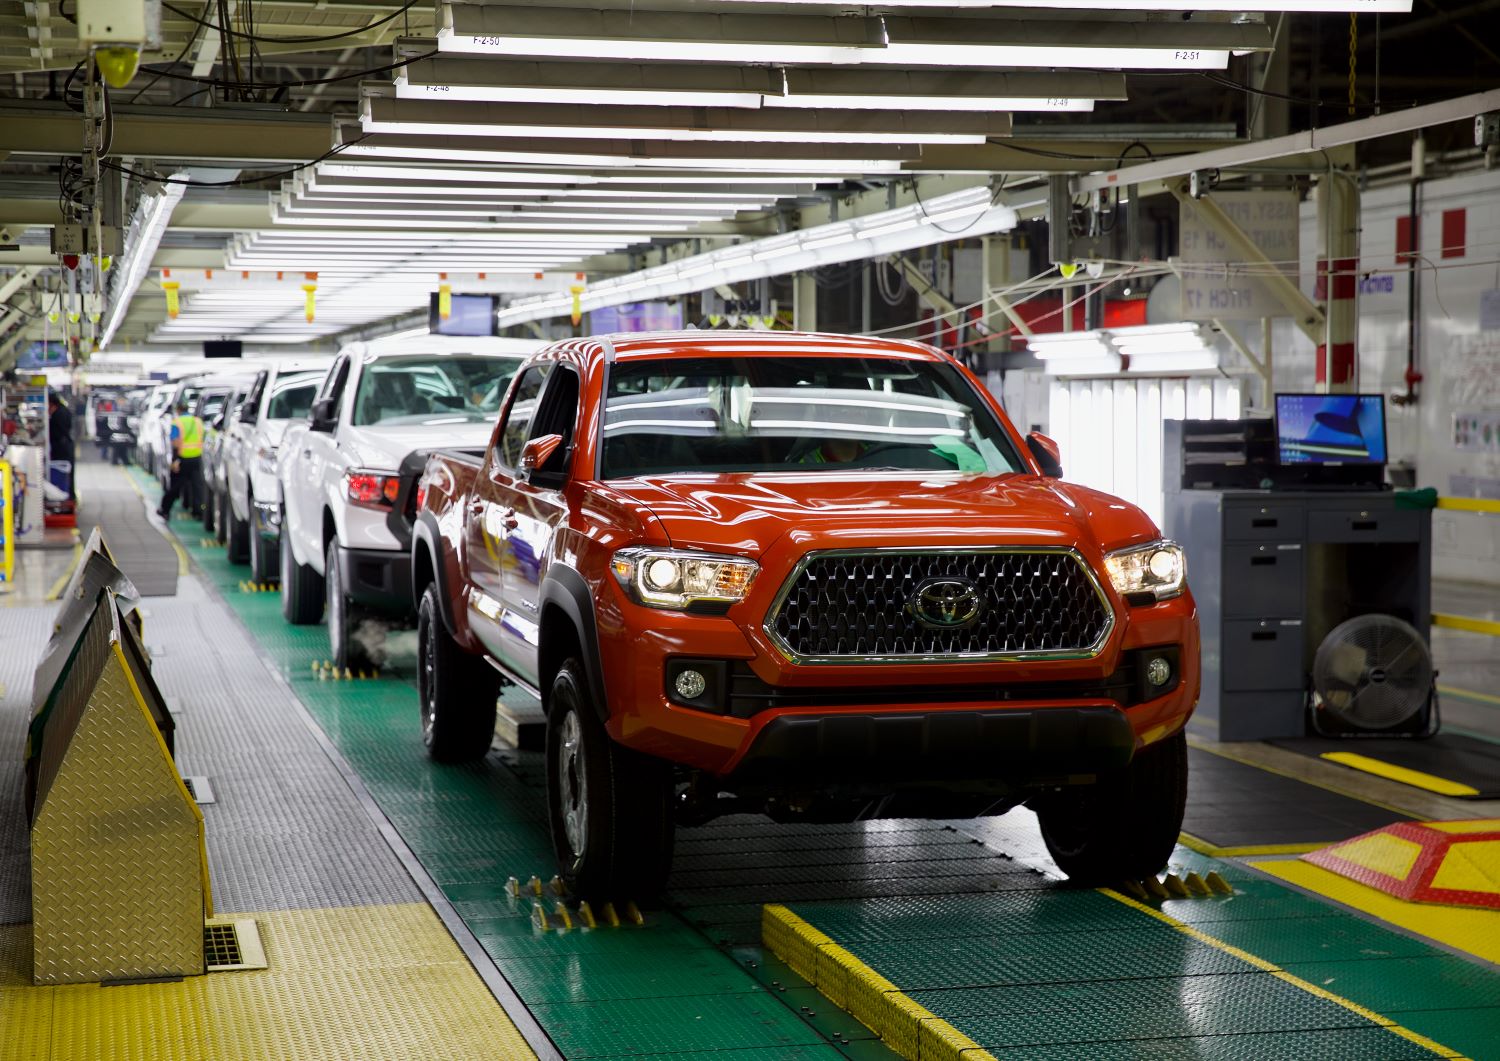 Toyota Tacoma trucks on assembly like at Toyota Motor Manufacturing, Texas plant